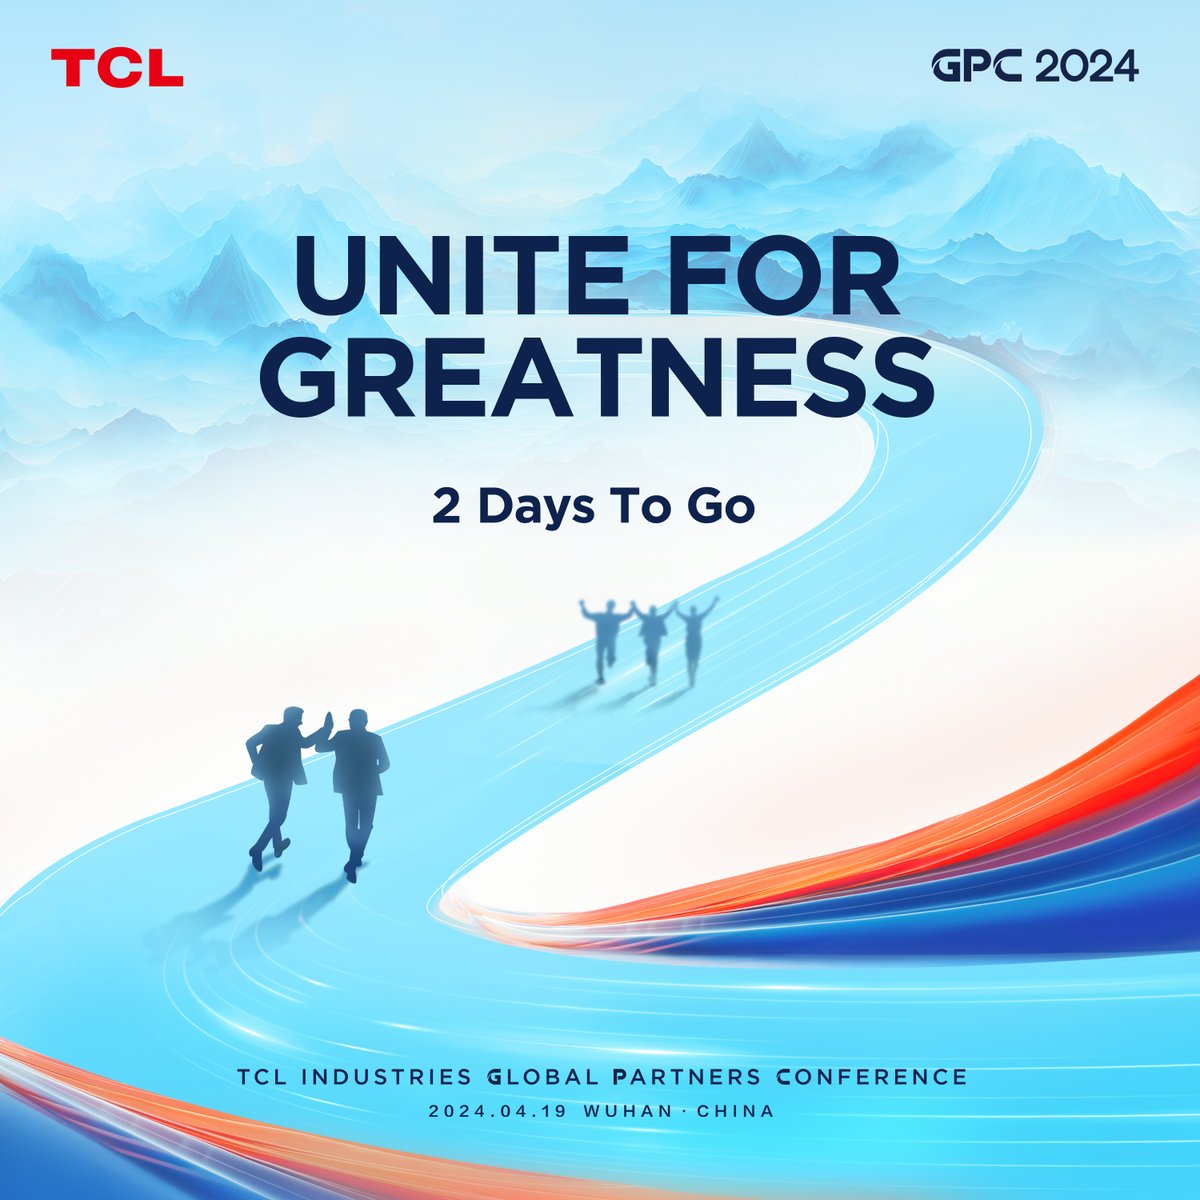 2 Days Remaining! Join us in innovating a global ecosystem with endless possibilities. #TCLGPC2024 #UniteforGreatness #INSPIREGREATNESS